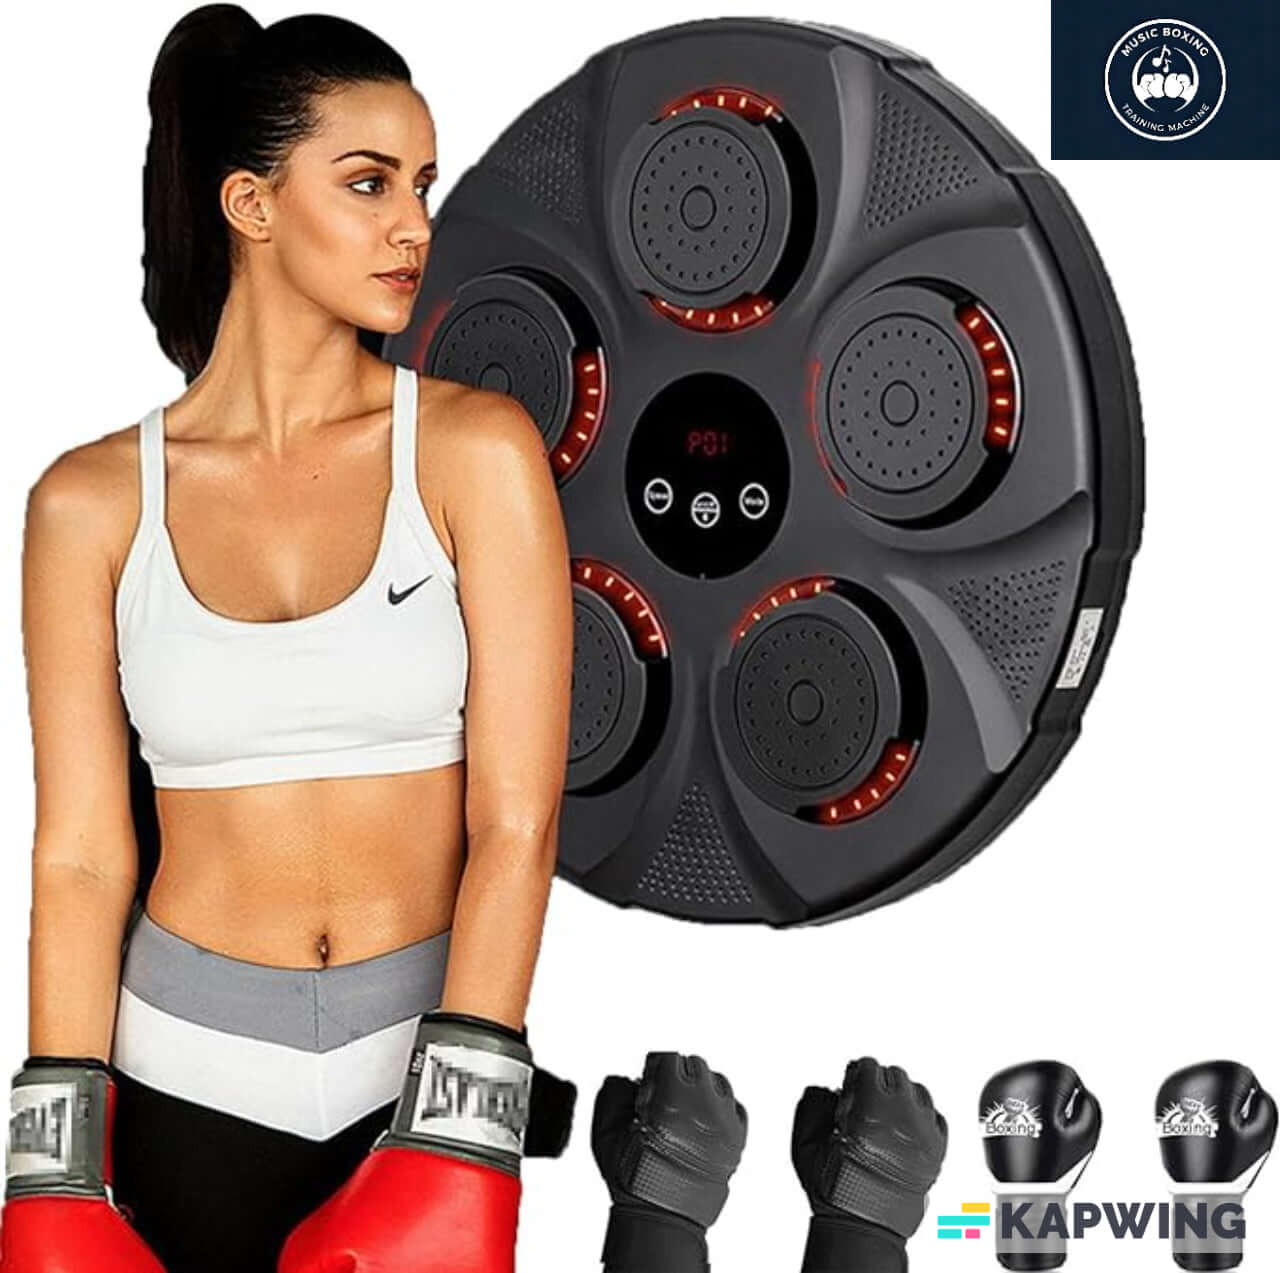 Elite Music Boxing Training Machine: A state-of-the-art boxing training equipment designed to elevate your workouts with rhythmic beats and dynamic sessions.